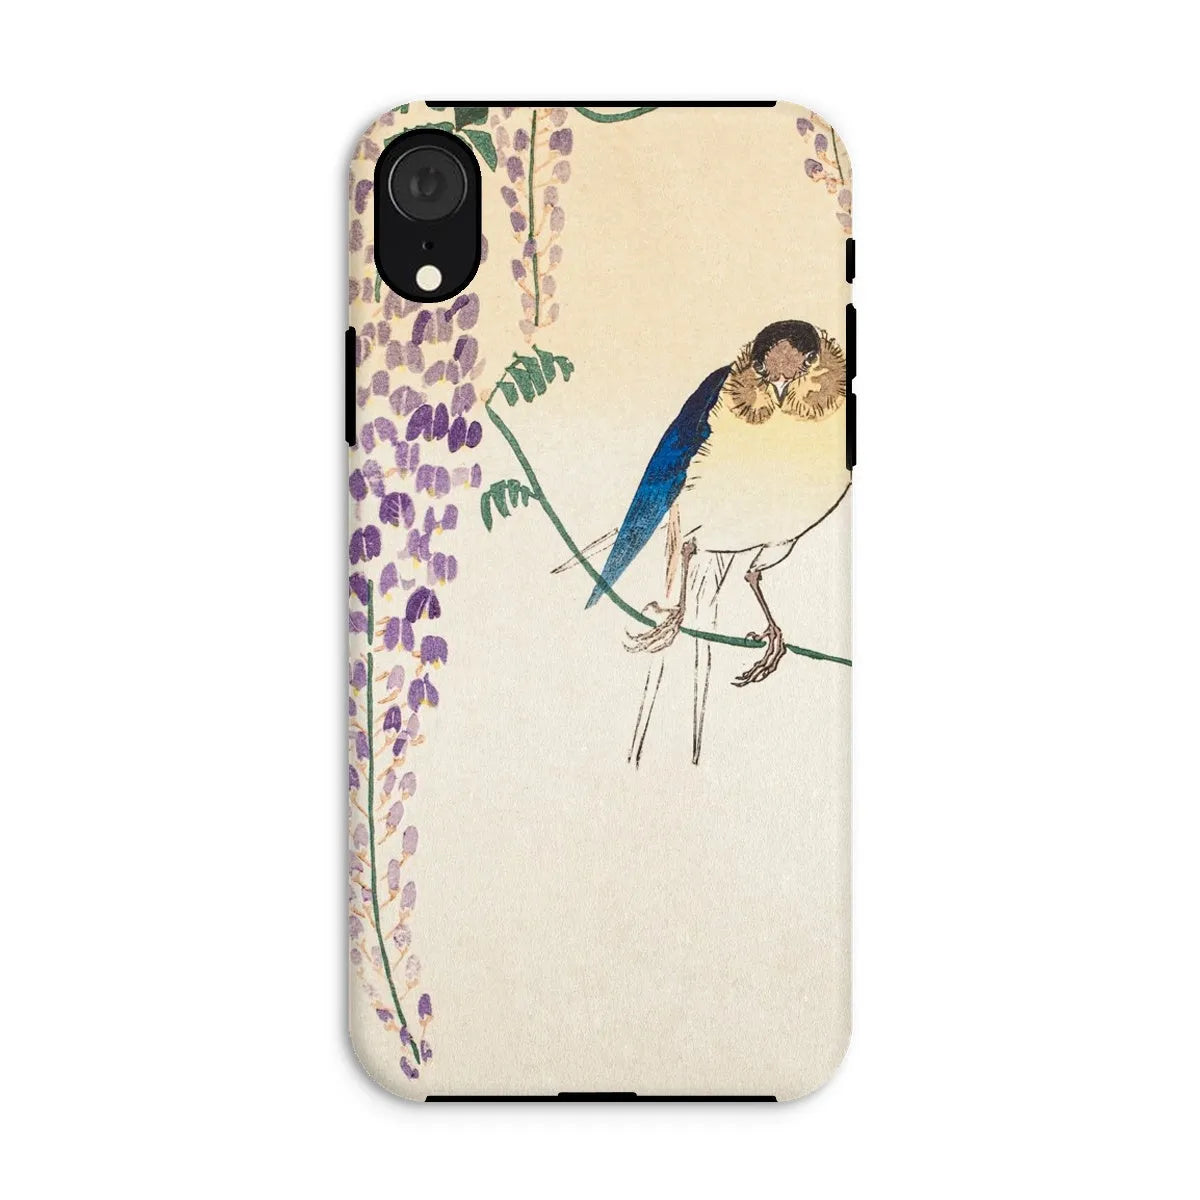 Wisteria And Swallow - Japanese Art Phone Case - Ohara Koson - Iphone Xr / Matte - Mobile Phone Cases - Aesthetic Art